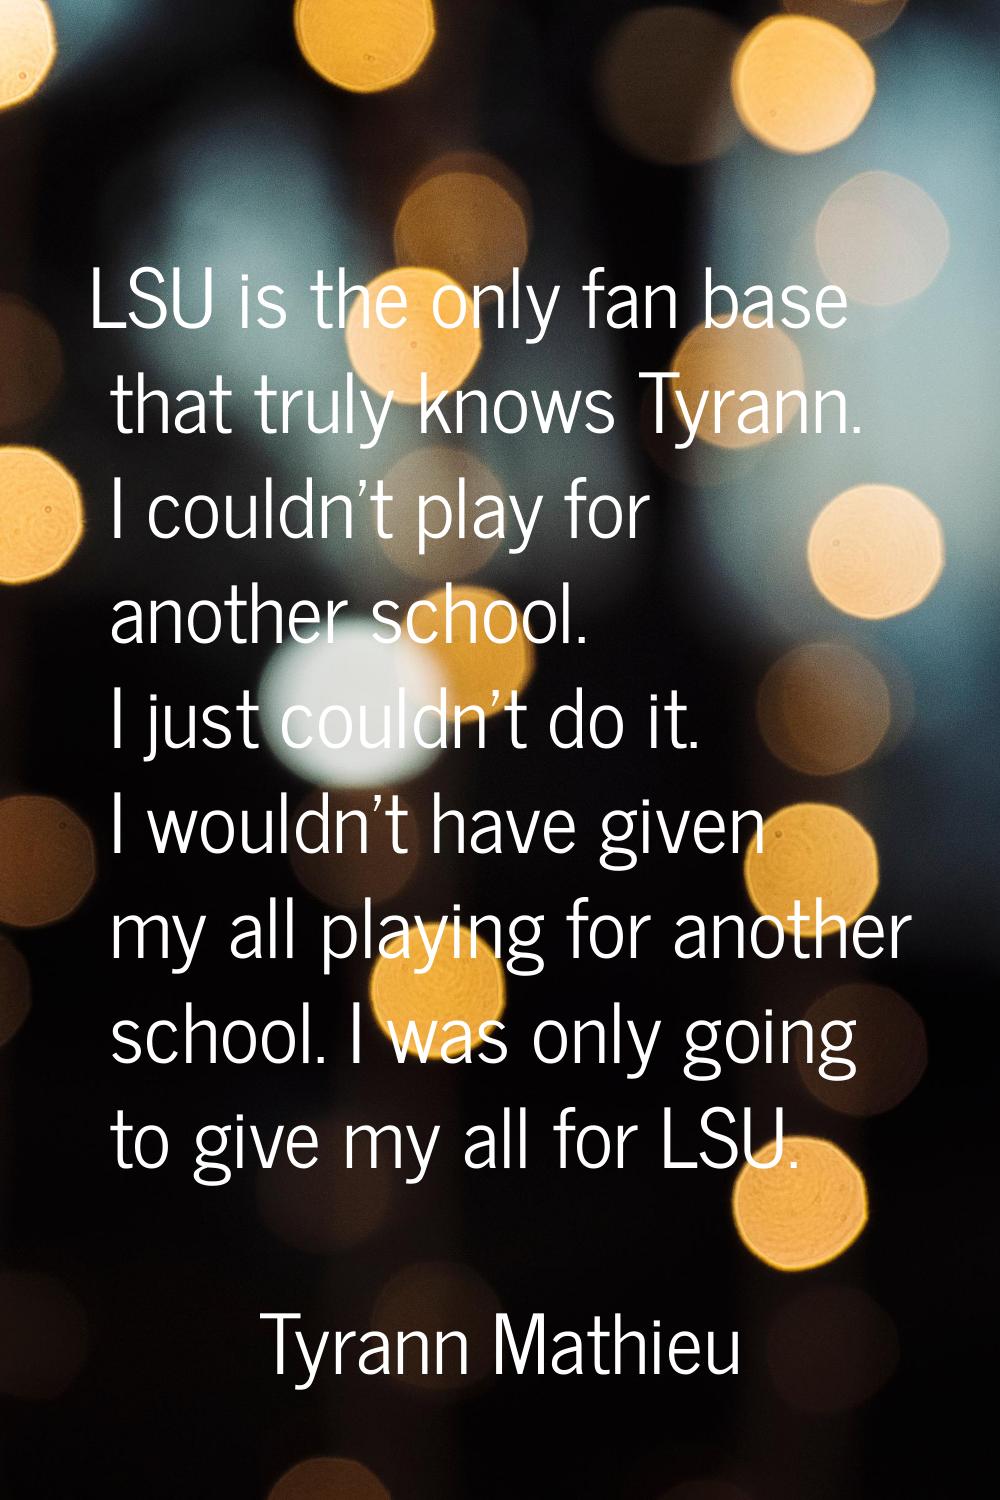 LSU is the only fan base that truly knows Tyrann. I couldn't play for another school. I just couldn